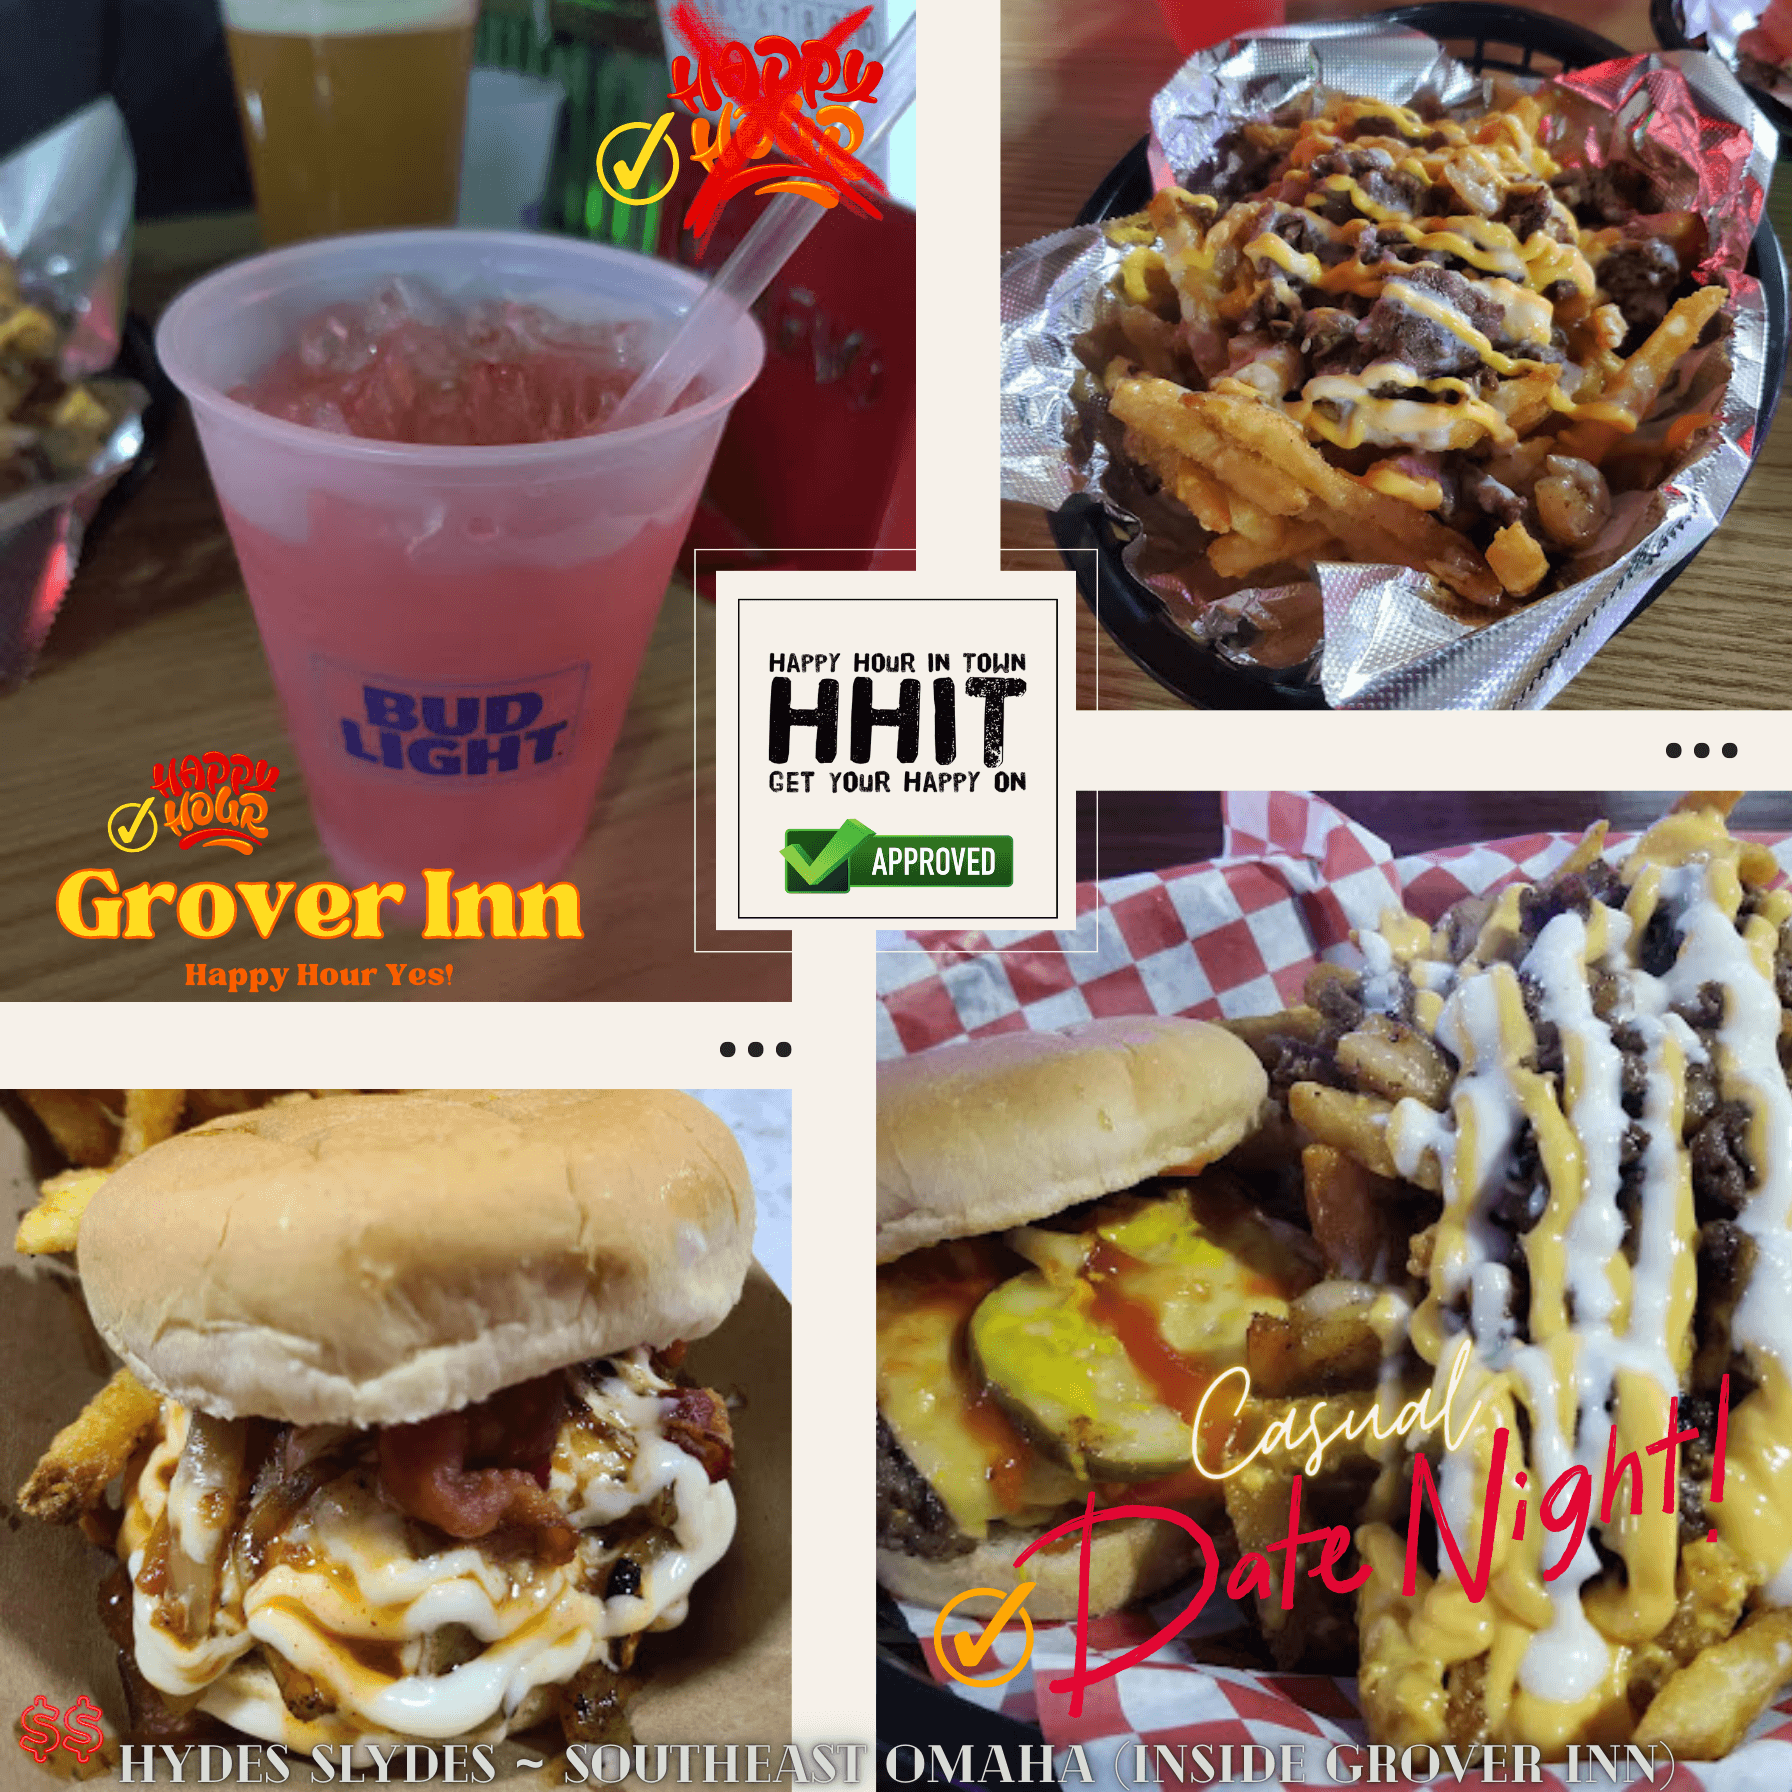 Hydes Slydes Burgers and Fries Omaha Happy Hour In Town